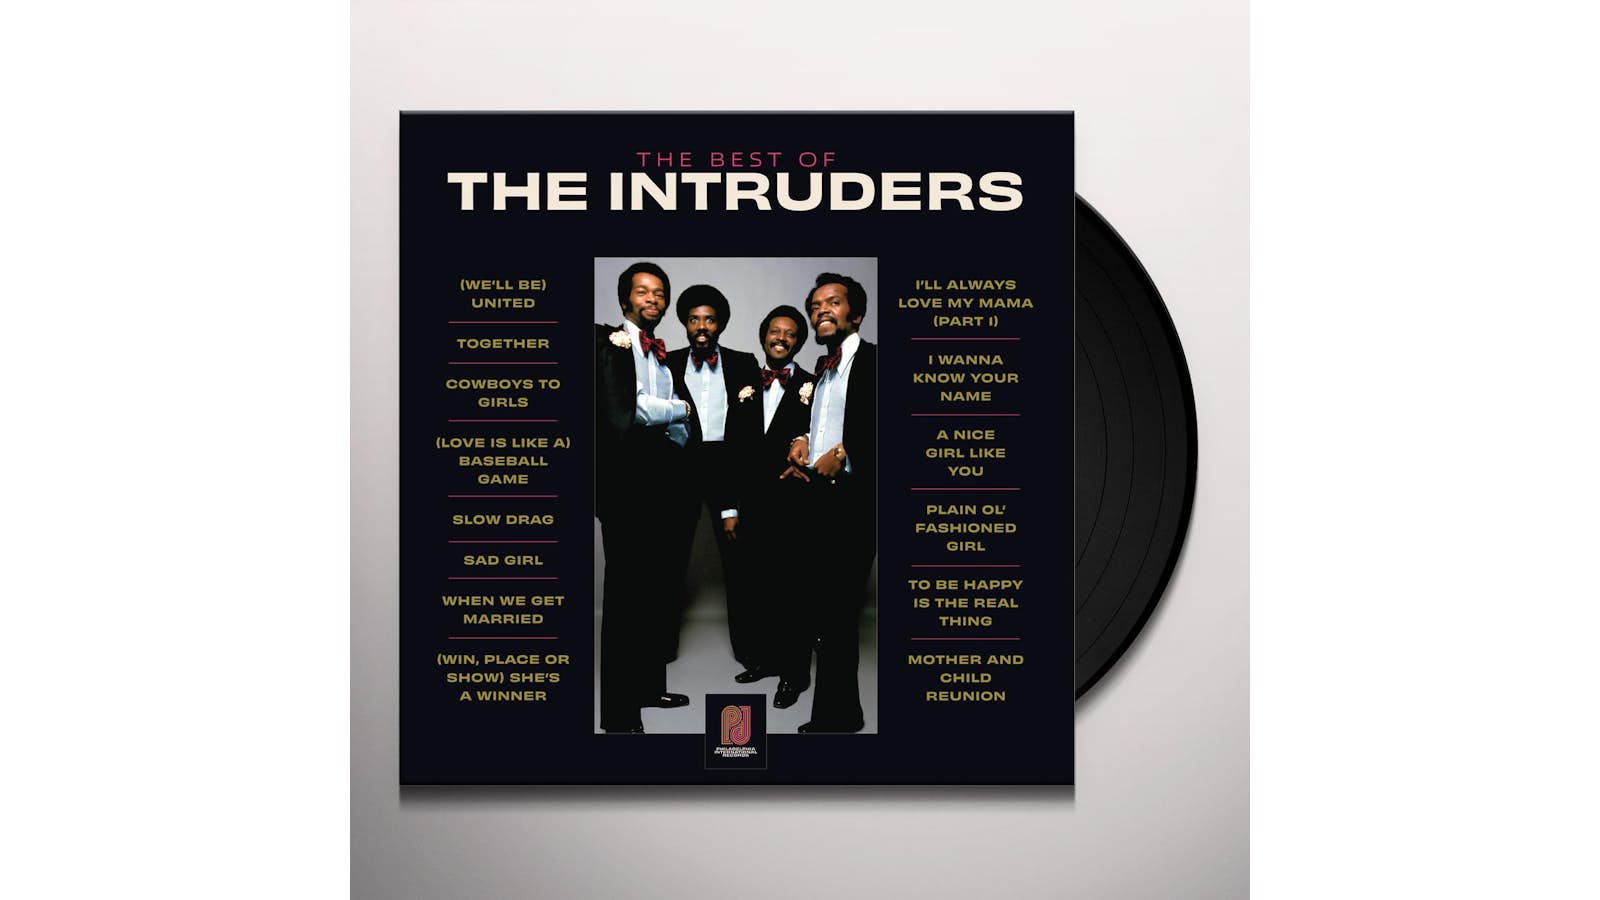 I'll Always Love my Mama - As recorded by The Intruders on Philadelphia  Records